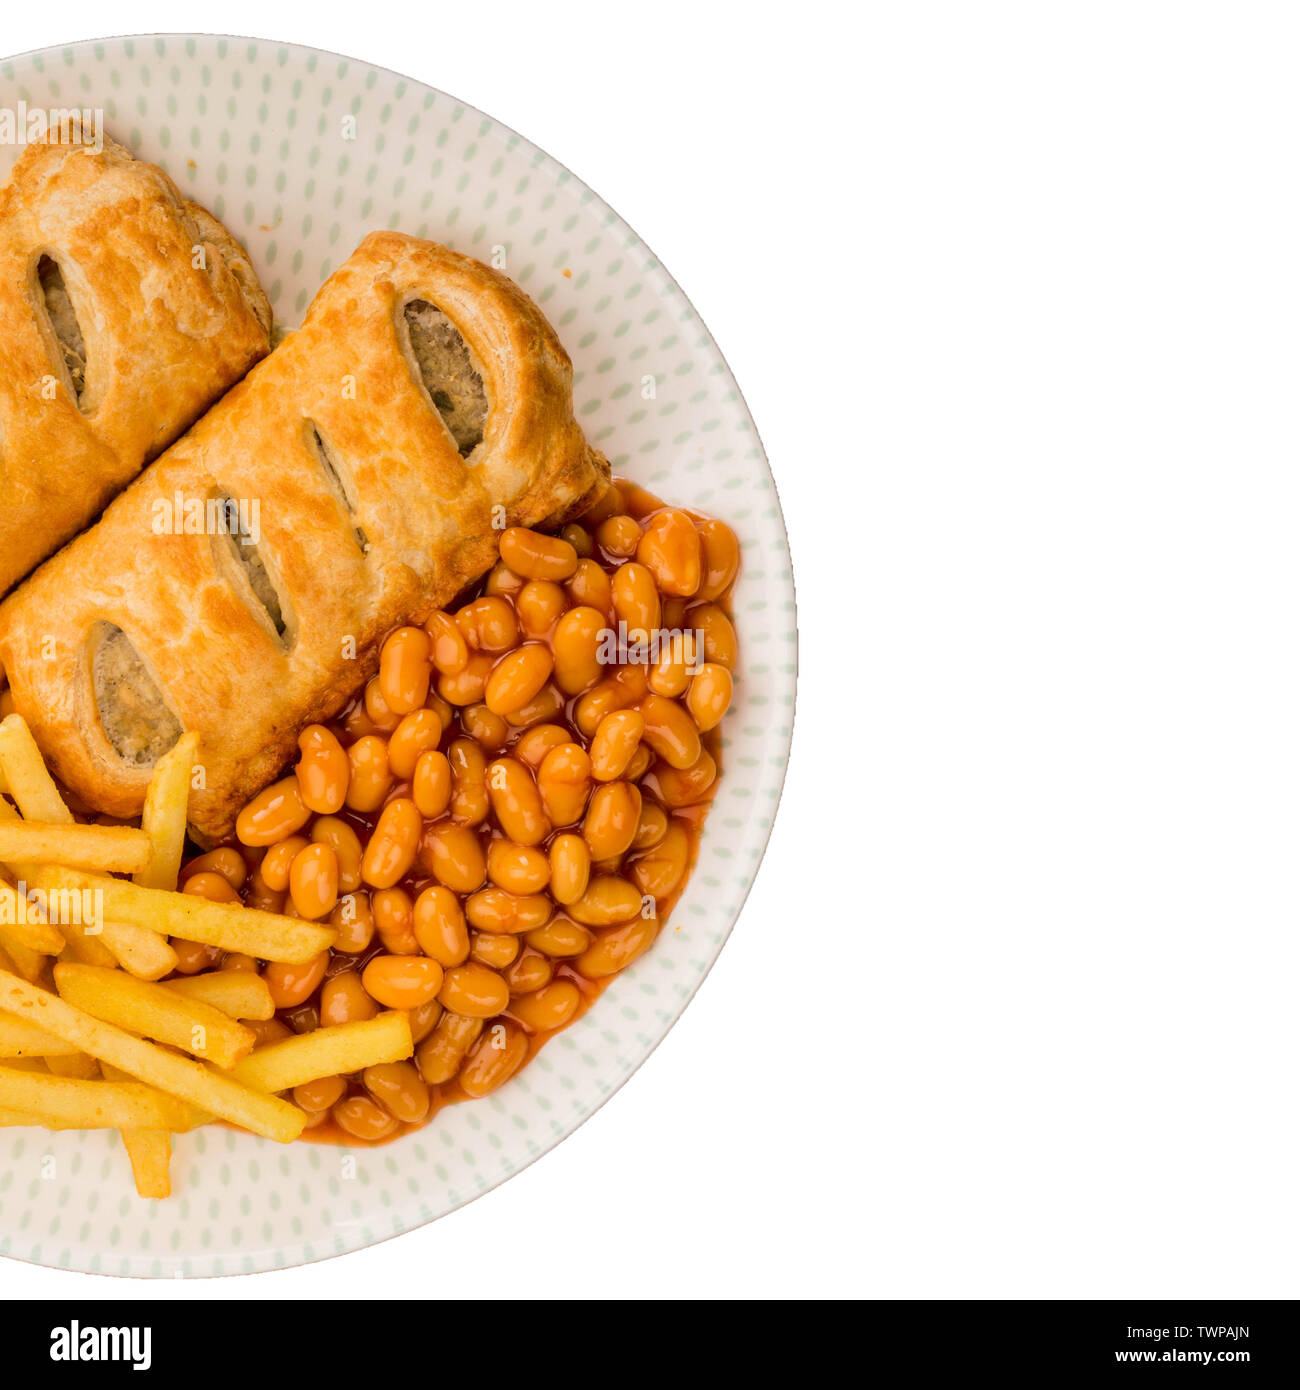 Tasty Sausage Rolls with Baked Beans and Chips Stock Photo